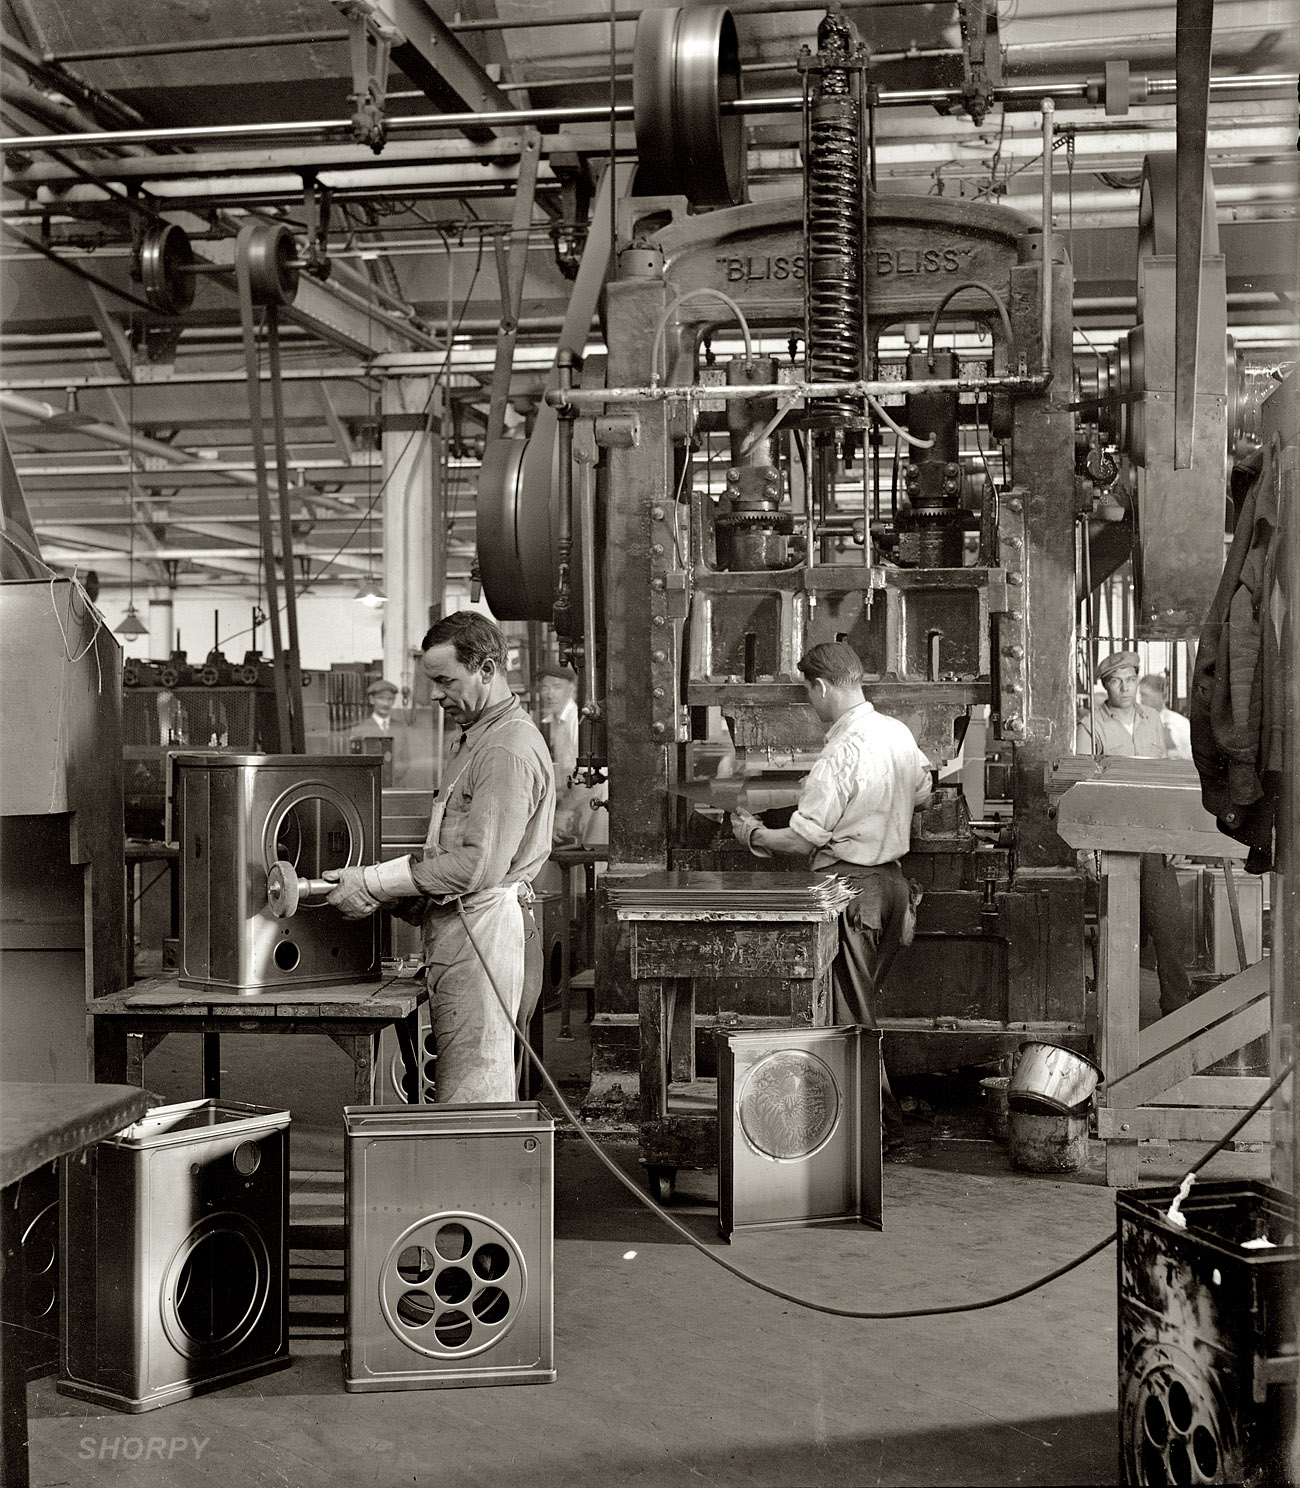 The Atwater Kent radio factory in Philadelphia in 1928 or 1929. View full size. National Photo Company Collection glass negative, Library of Congress.